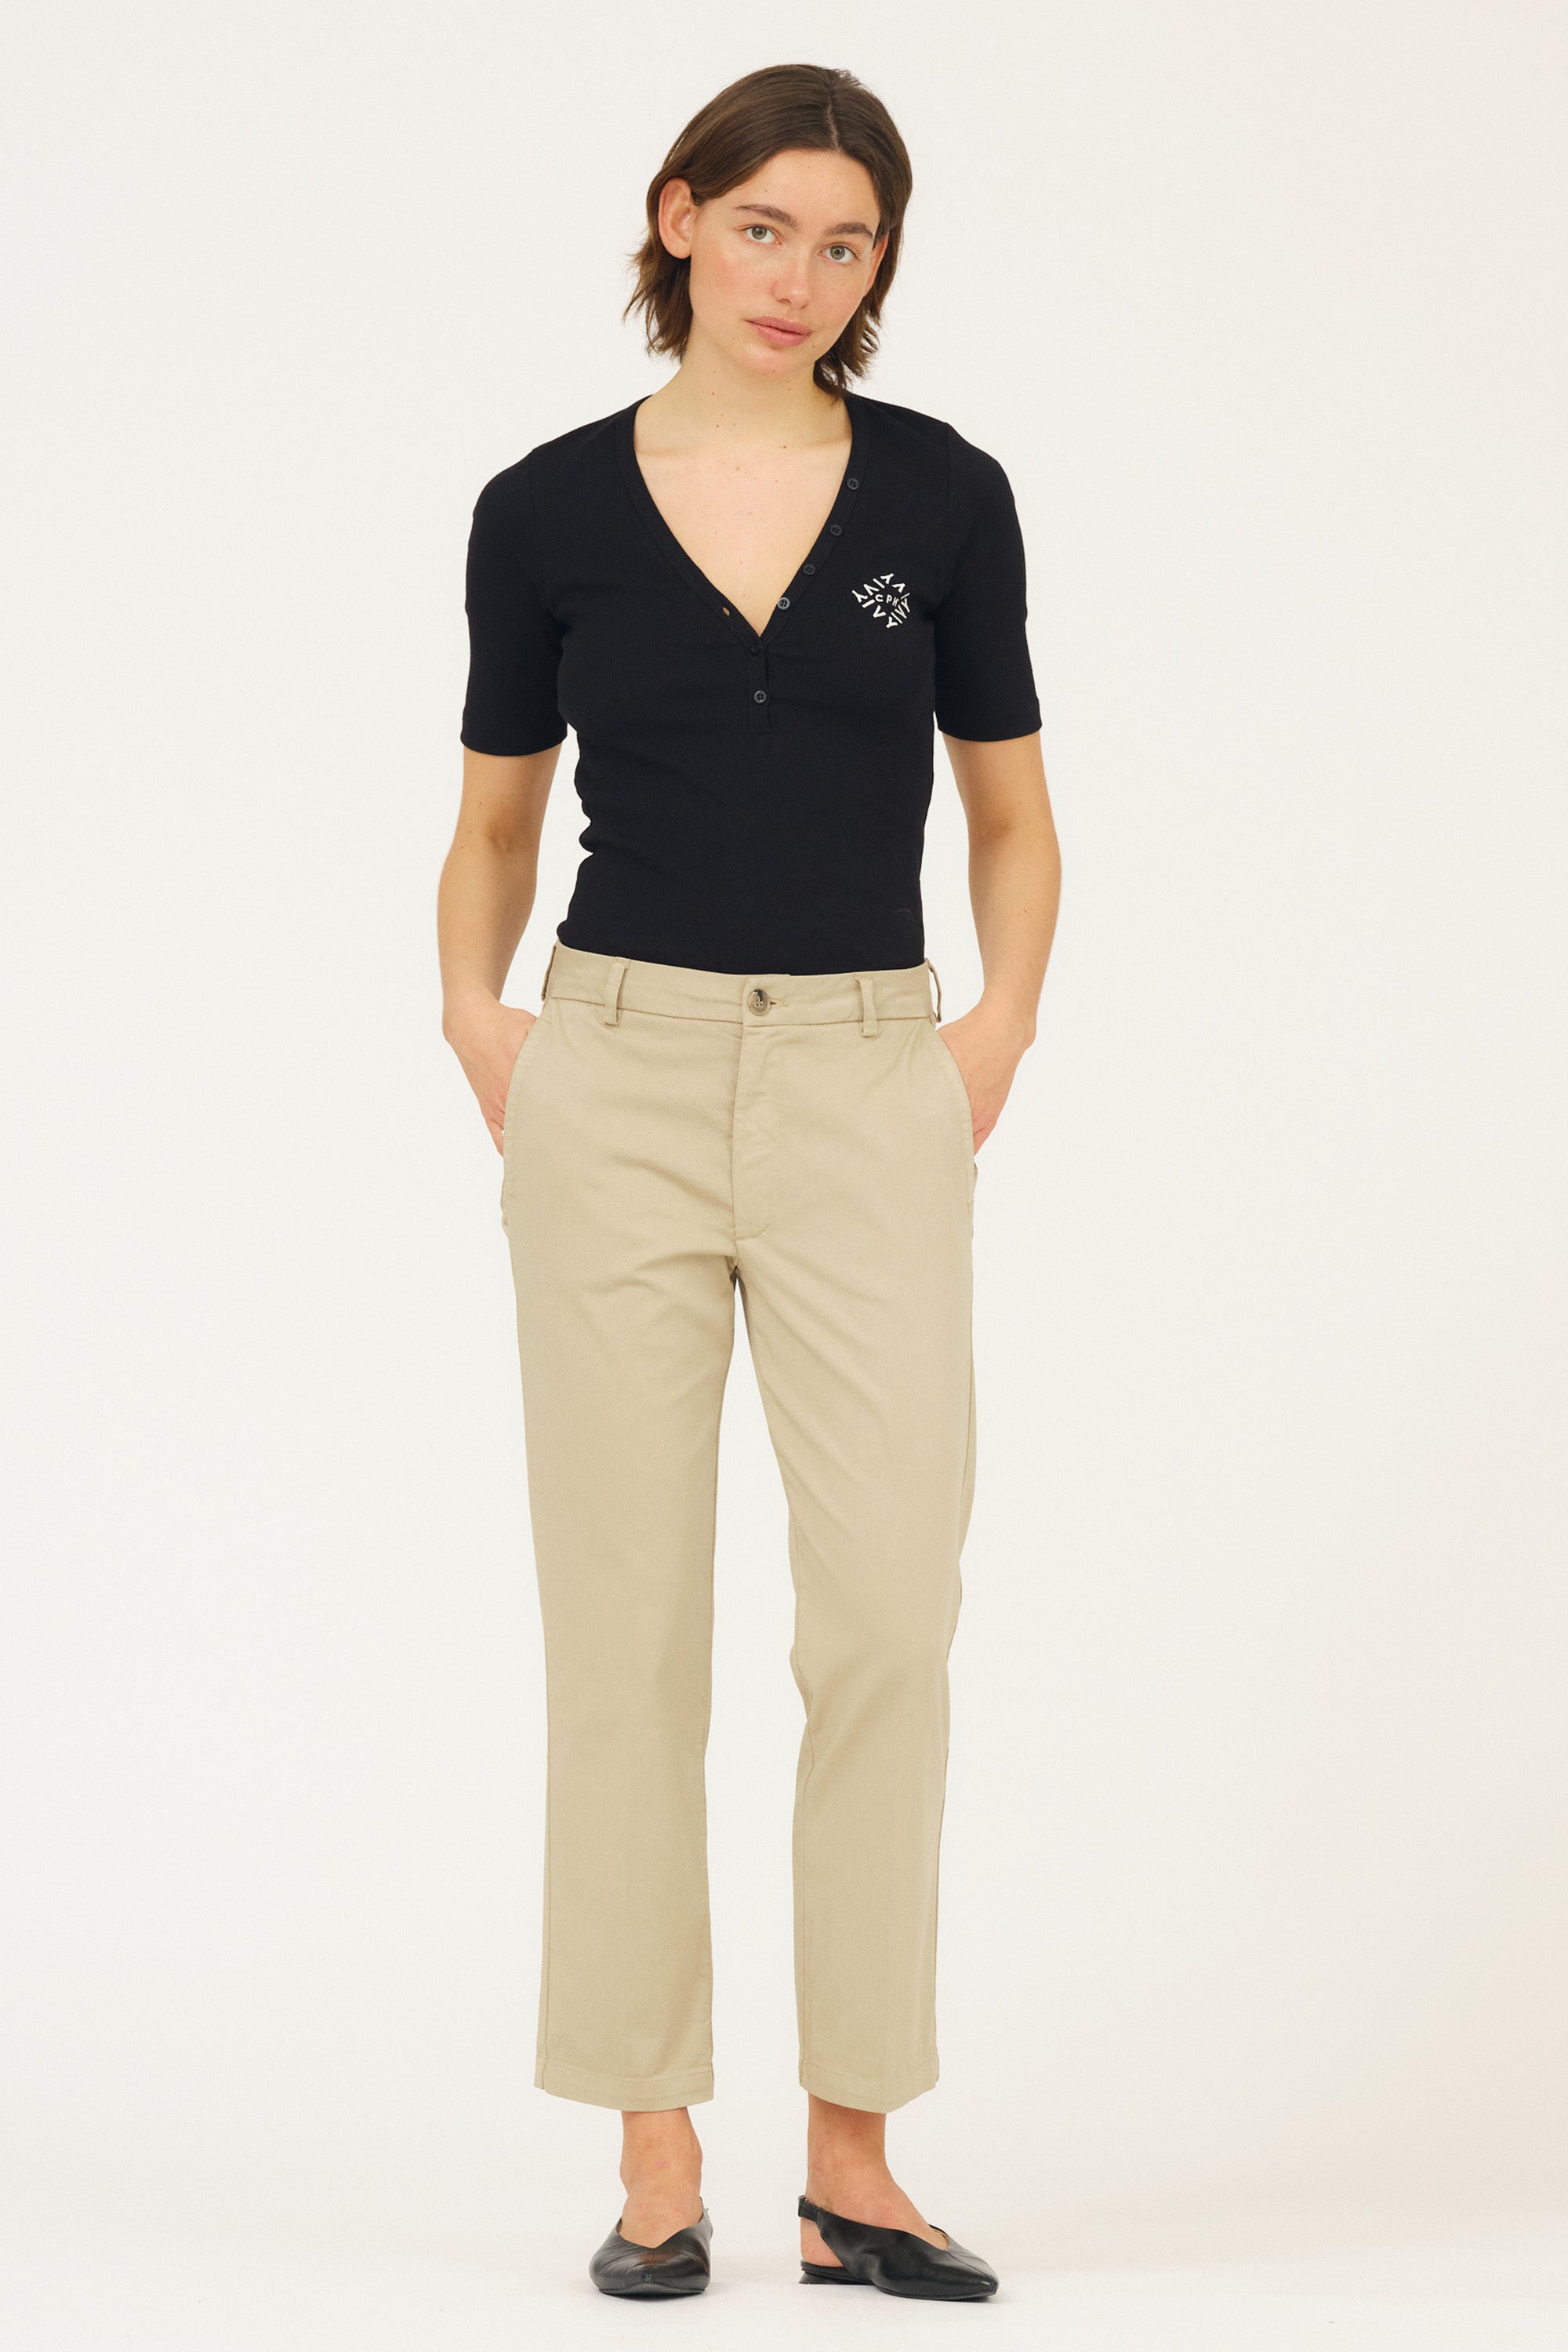 Wow Straight Five-Pocket Pants | Old Navy